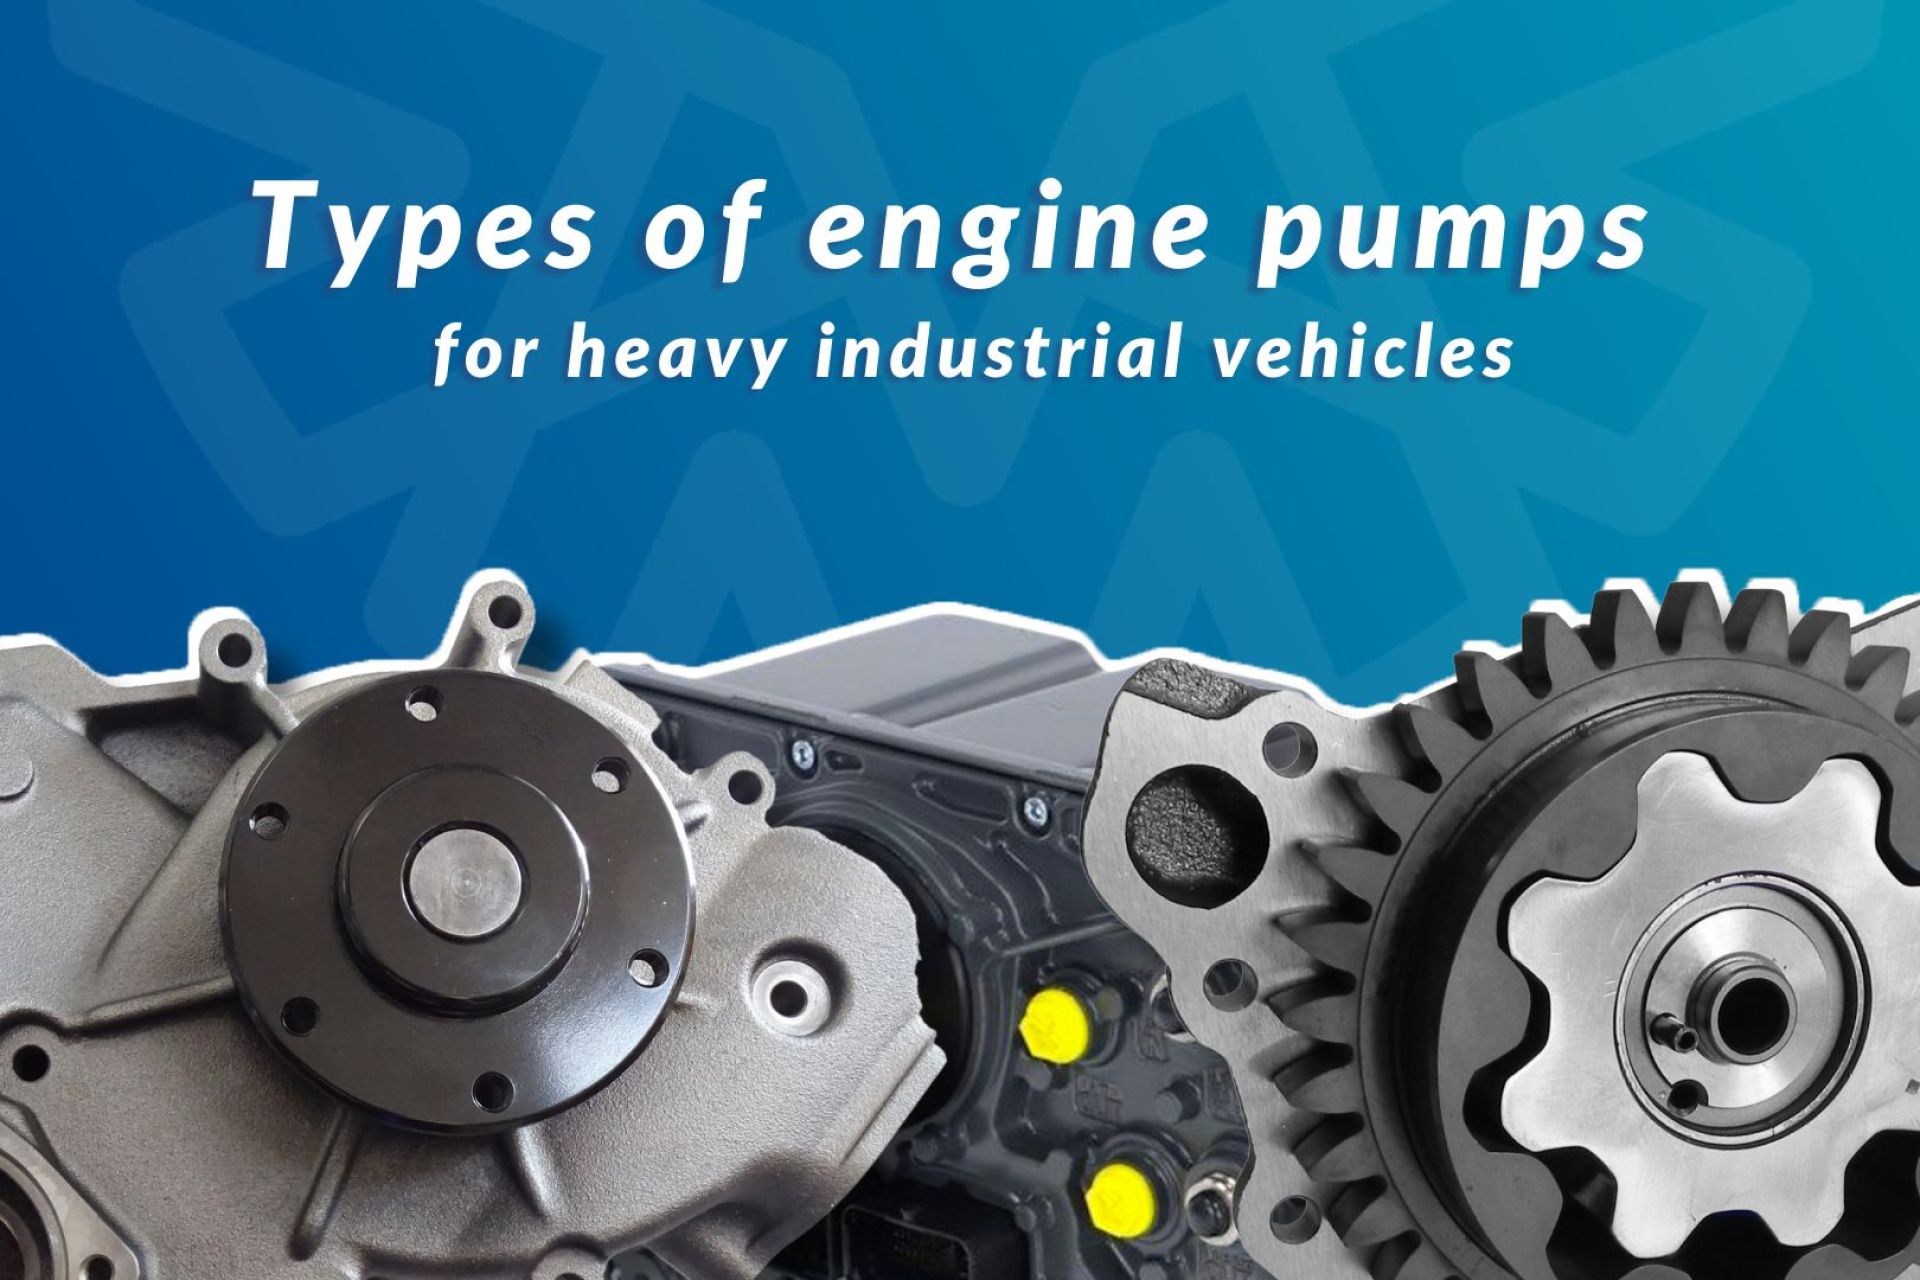 Types of engine pumps for heavy industrial vehicles